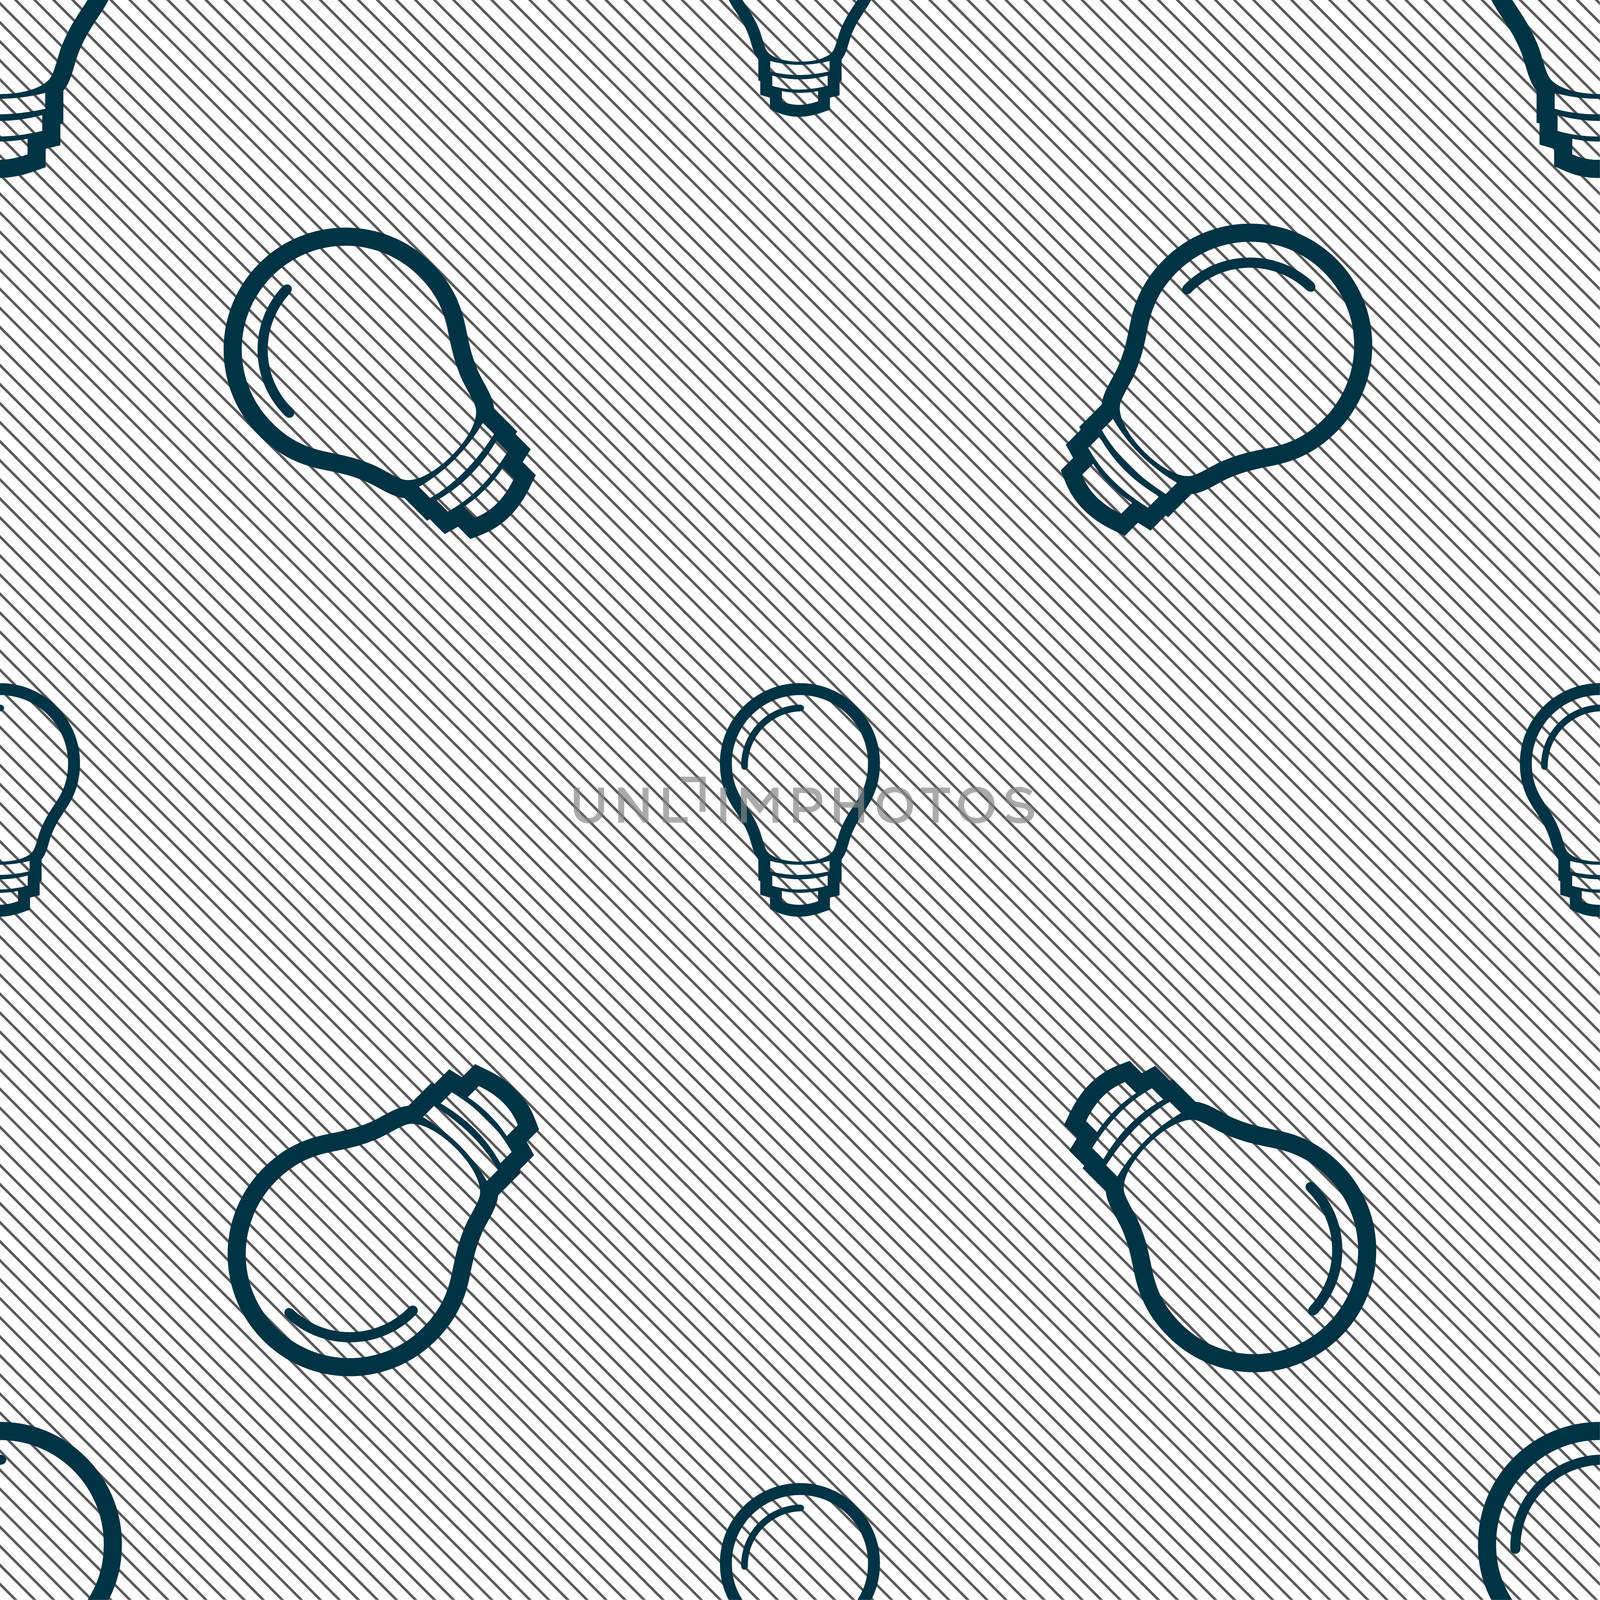 Light bulb icon sign. Seamless pattern with geometric texture.  by serhii_lohvyniuk